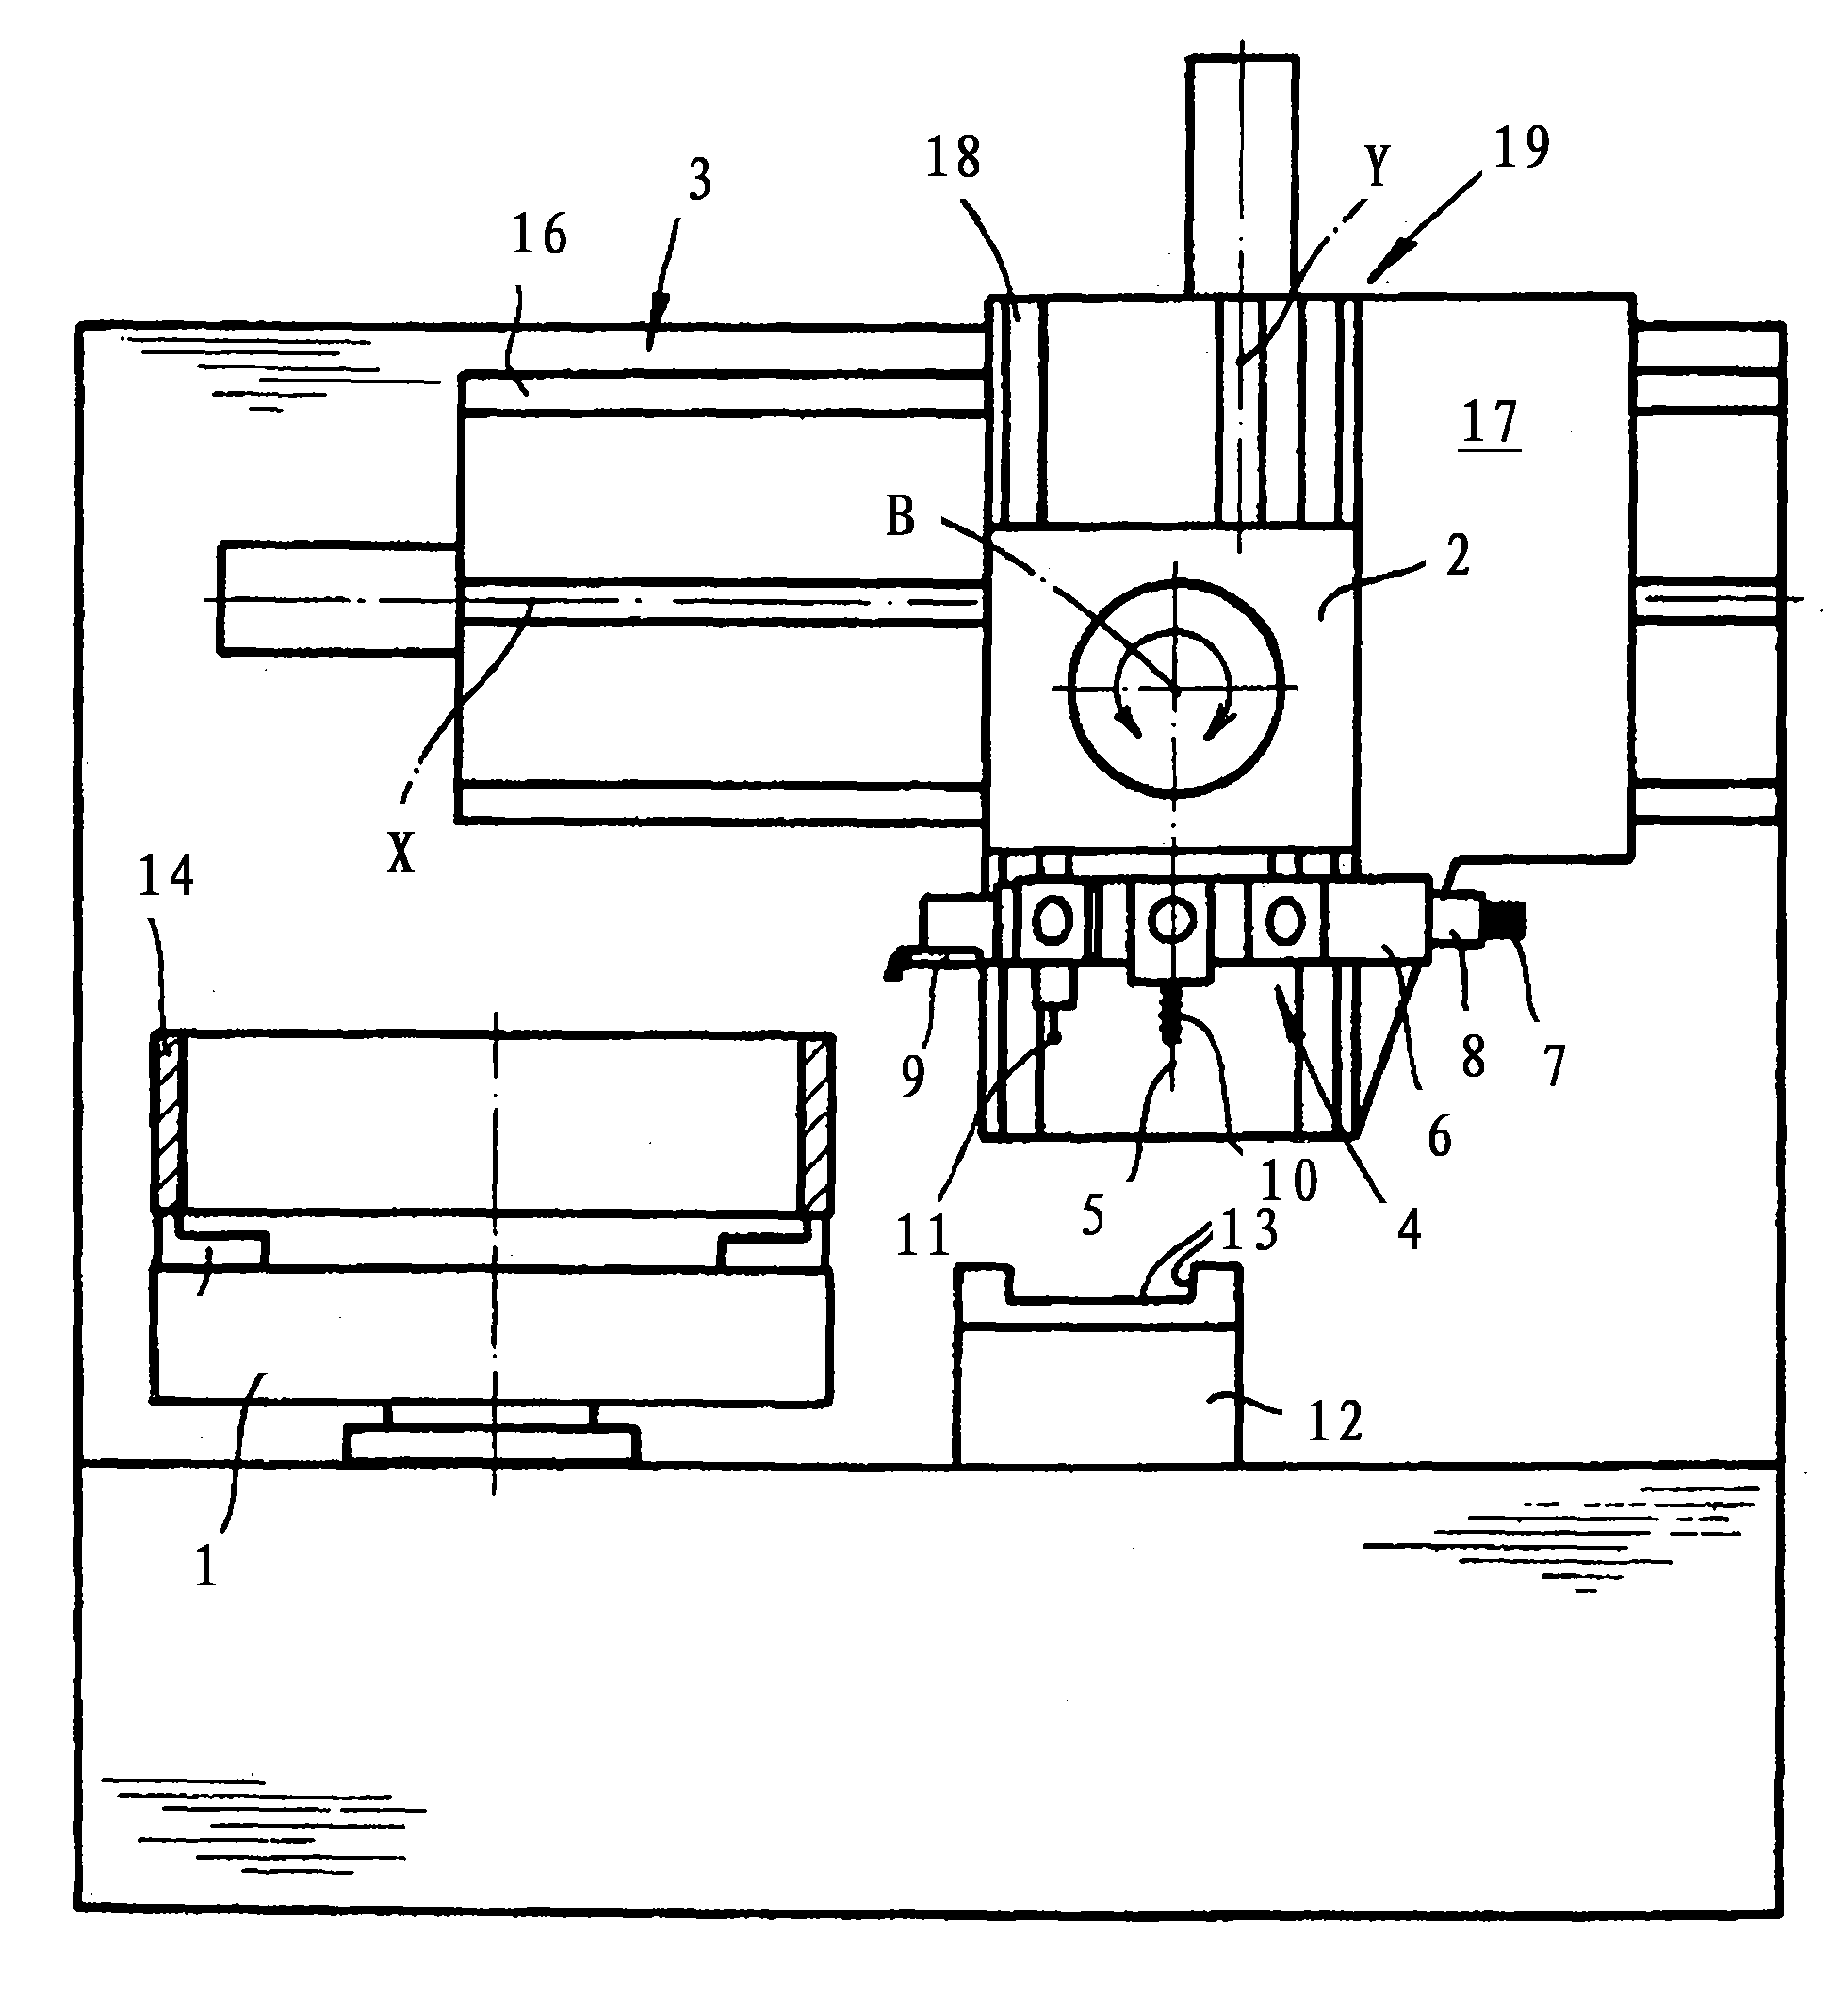 Device for performing fine machining on annular workpiece